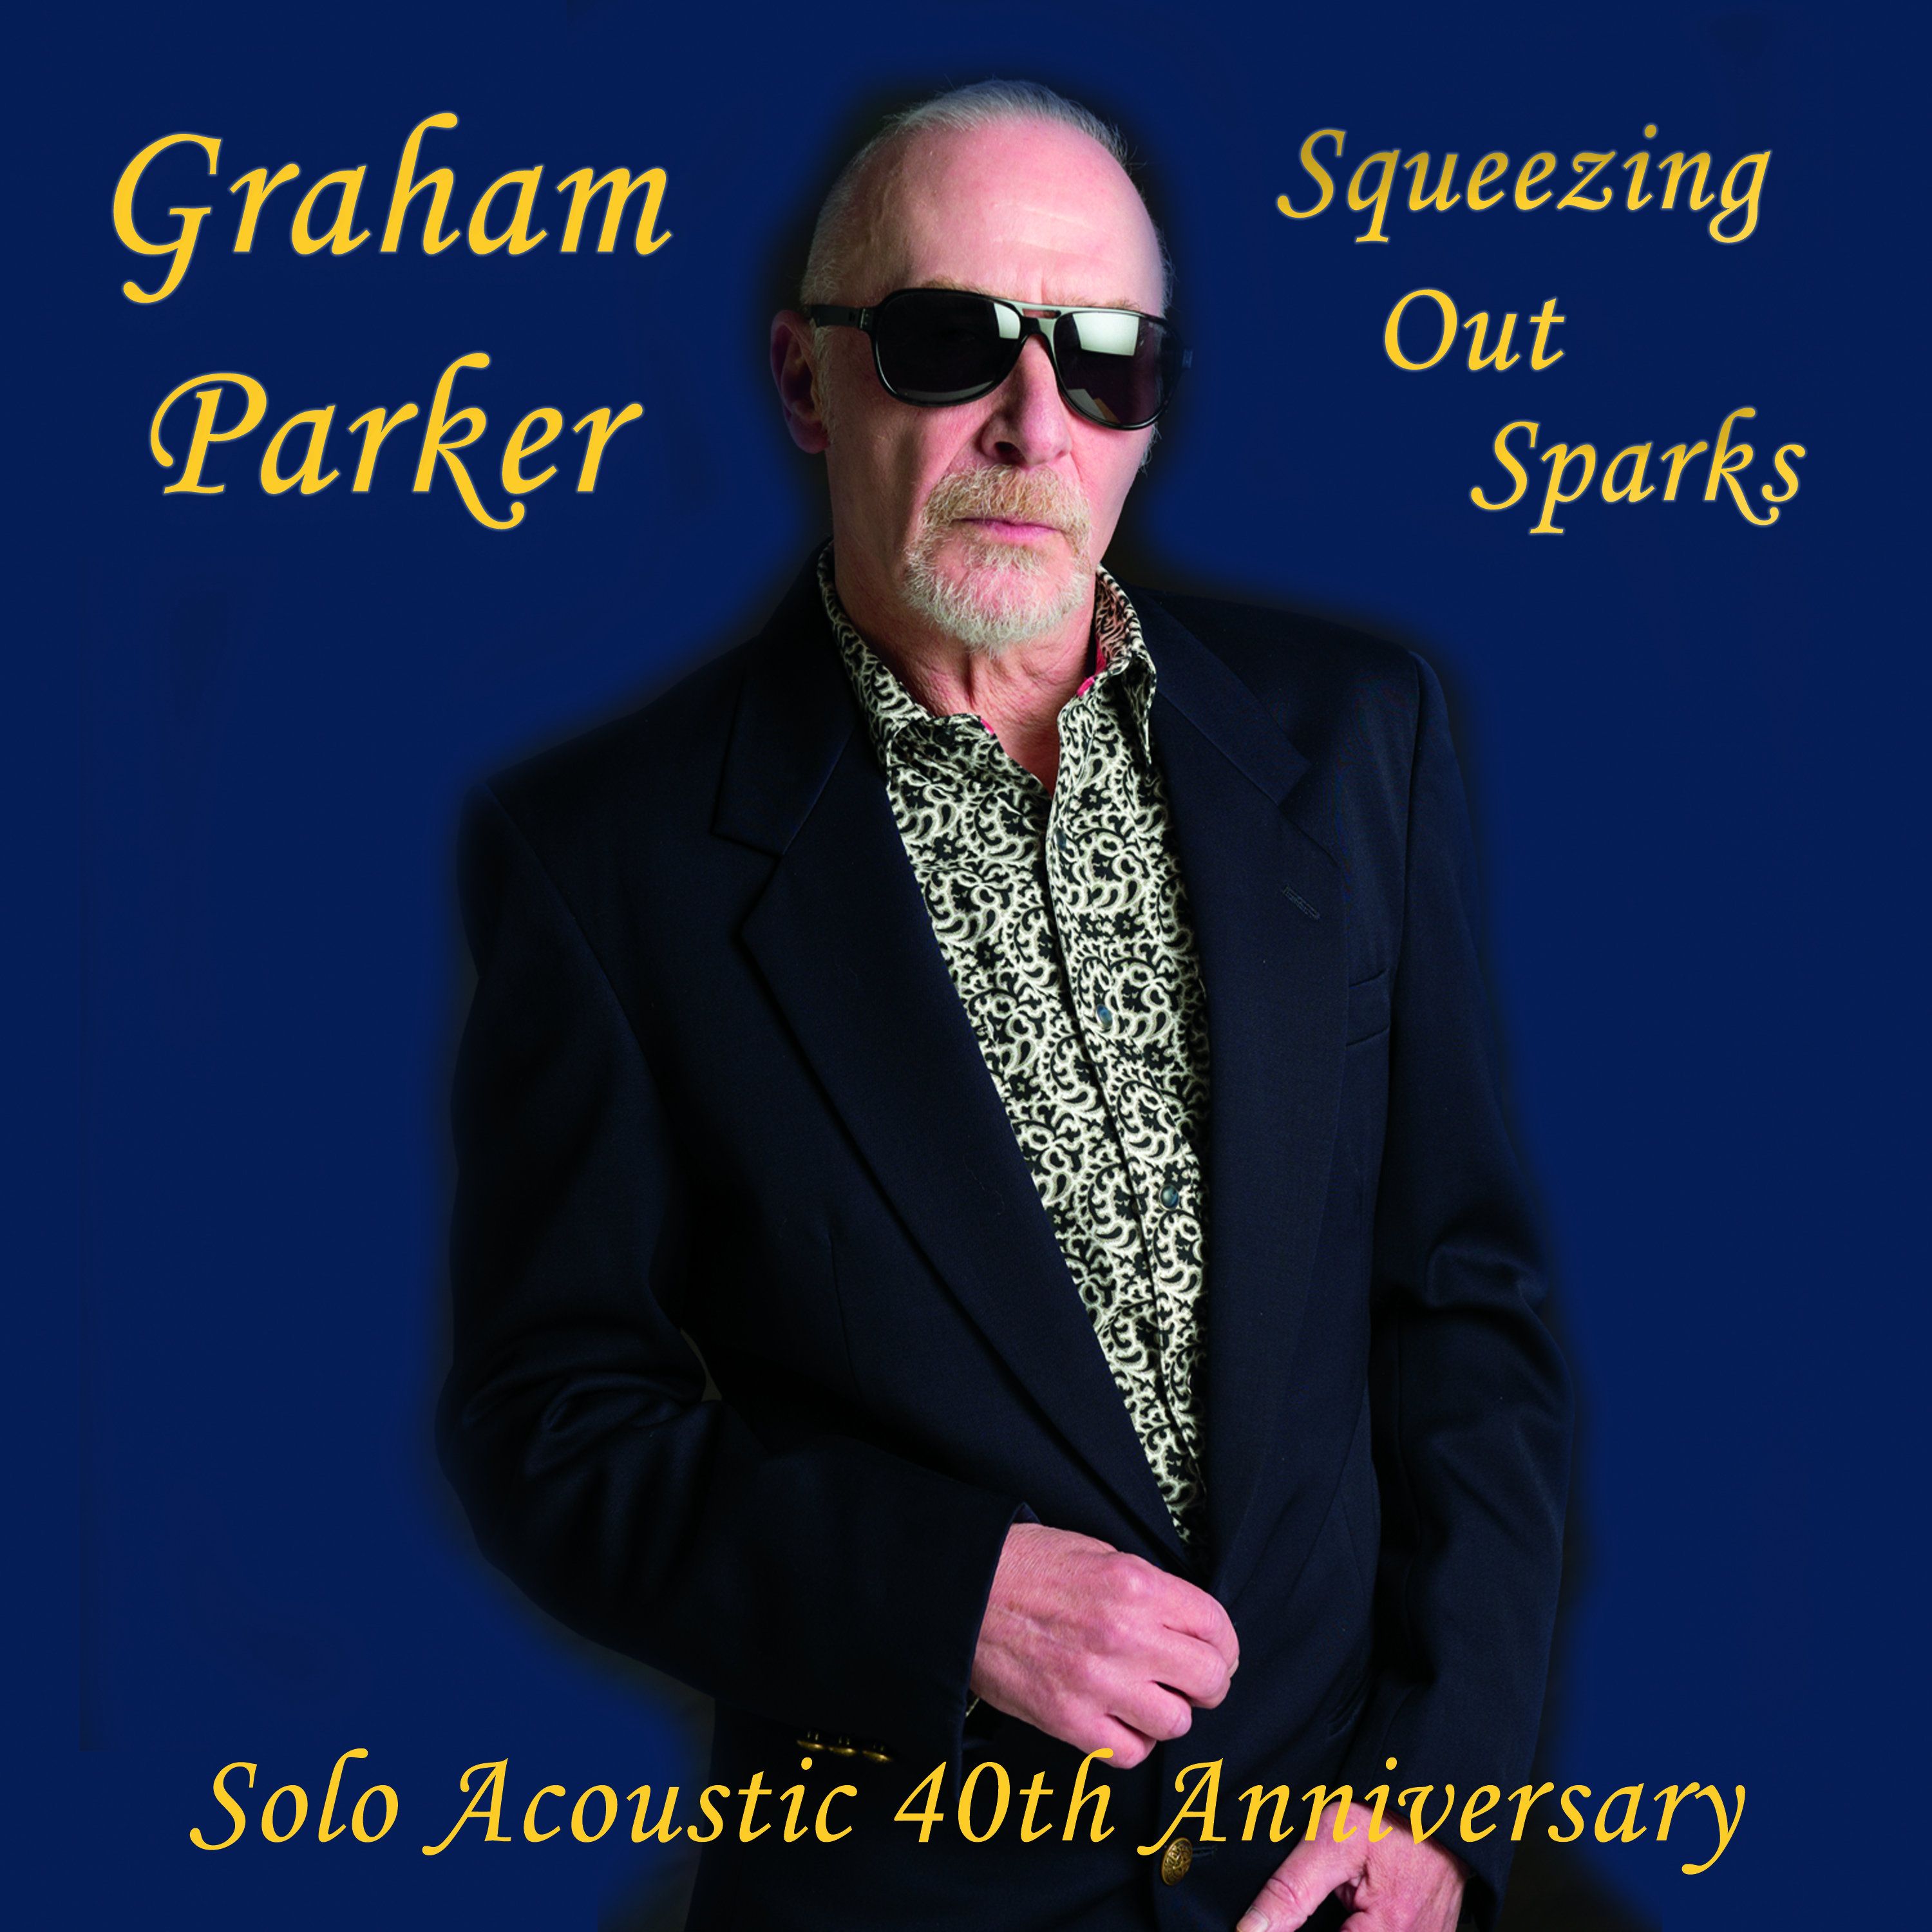 Squeezing Out Sparks Solo Acoustic 40th Anniversary